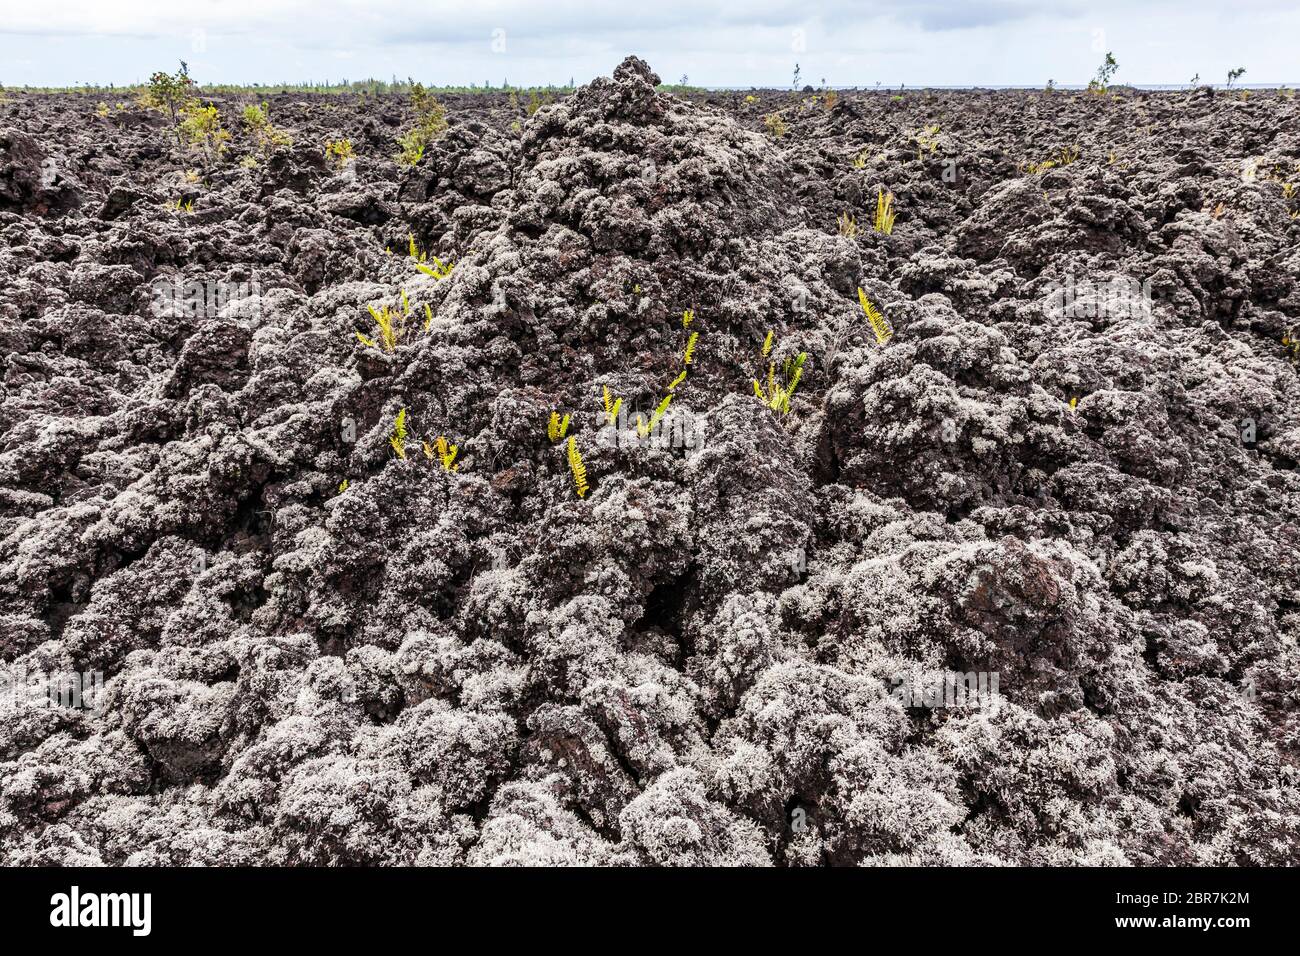 A'a lava field covered with Stereocaulon volcani, a lichen that helps grow soils on lava flows, Puna, Hawai'i, Hawaii, USA. Stock Photo